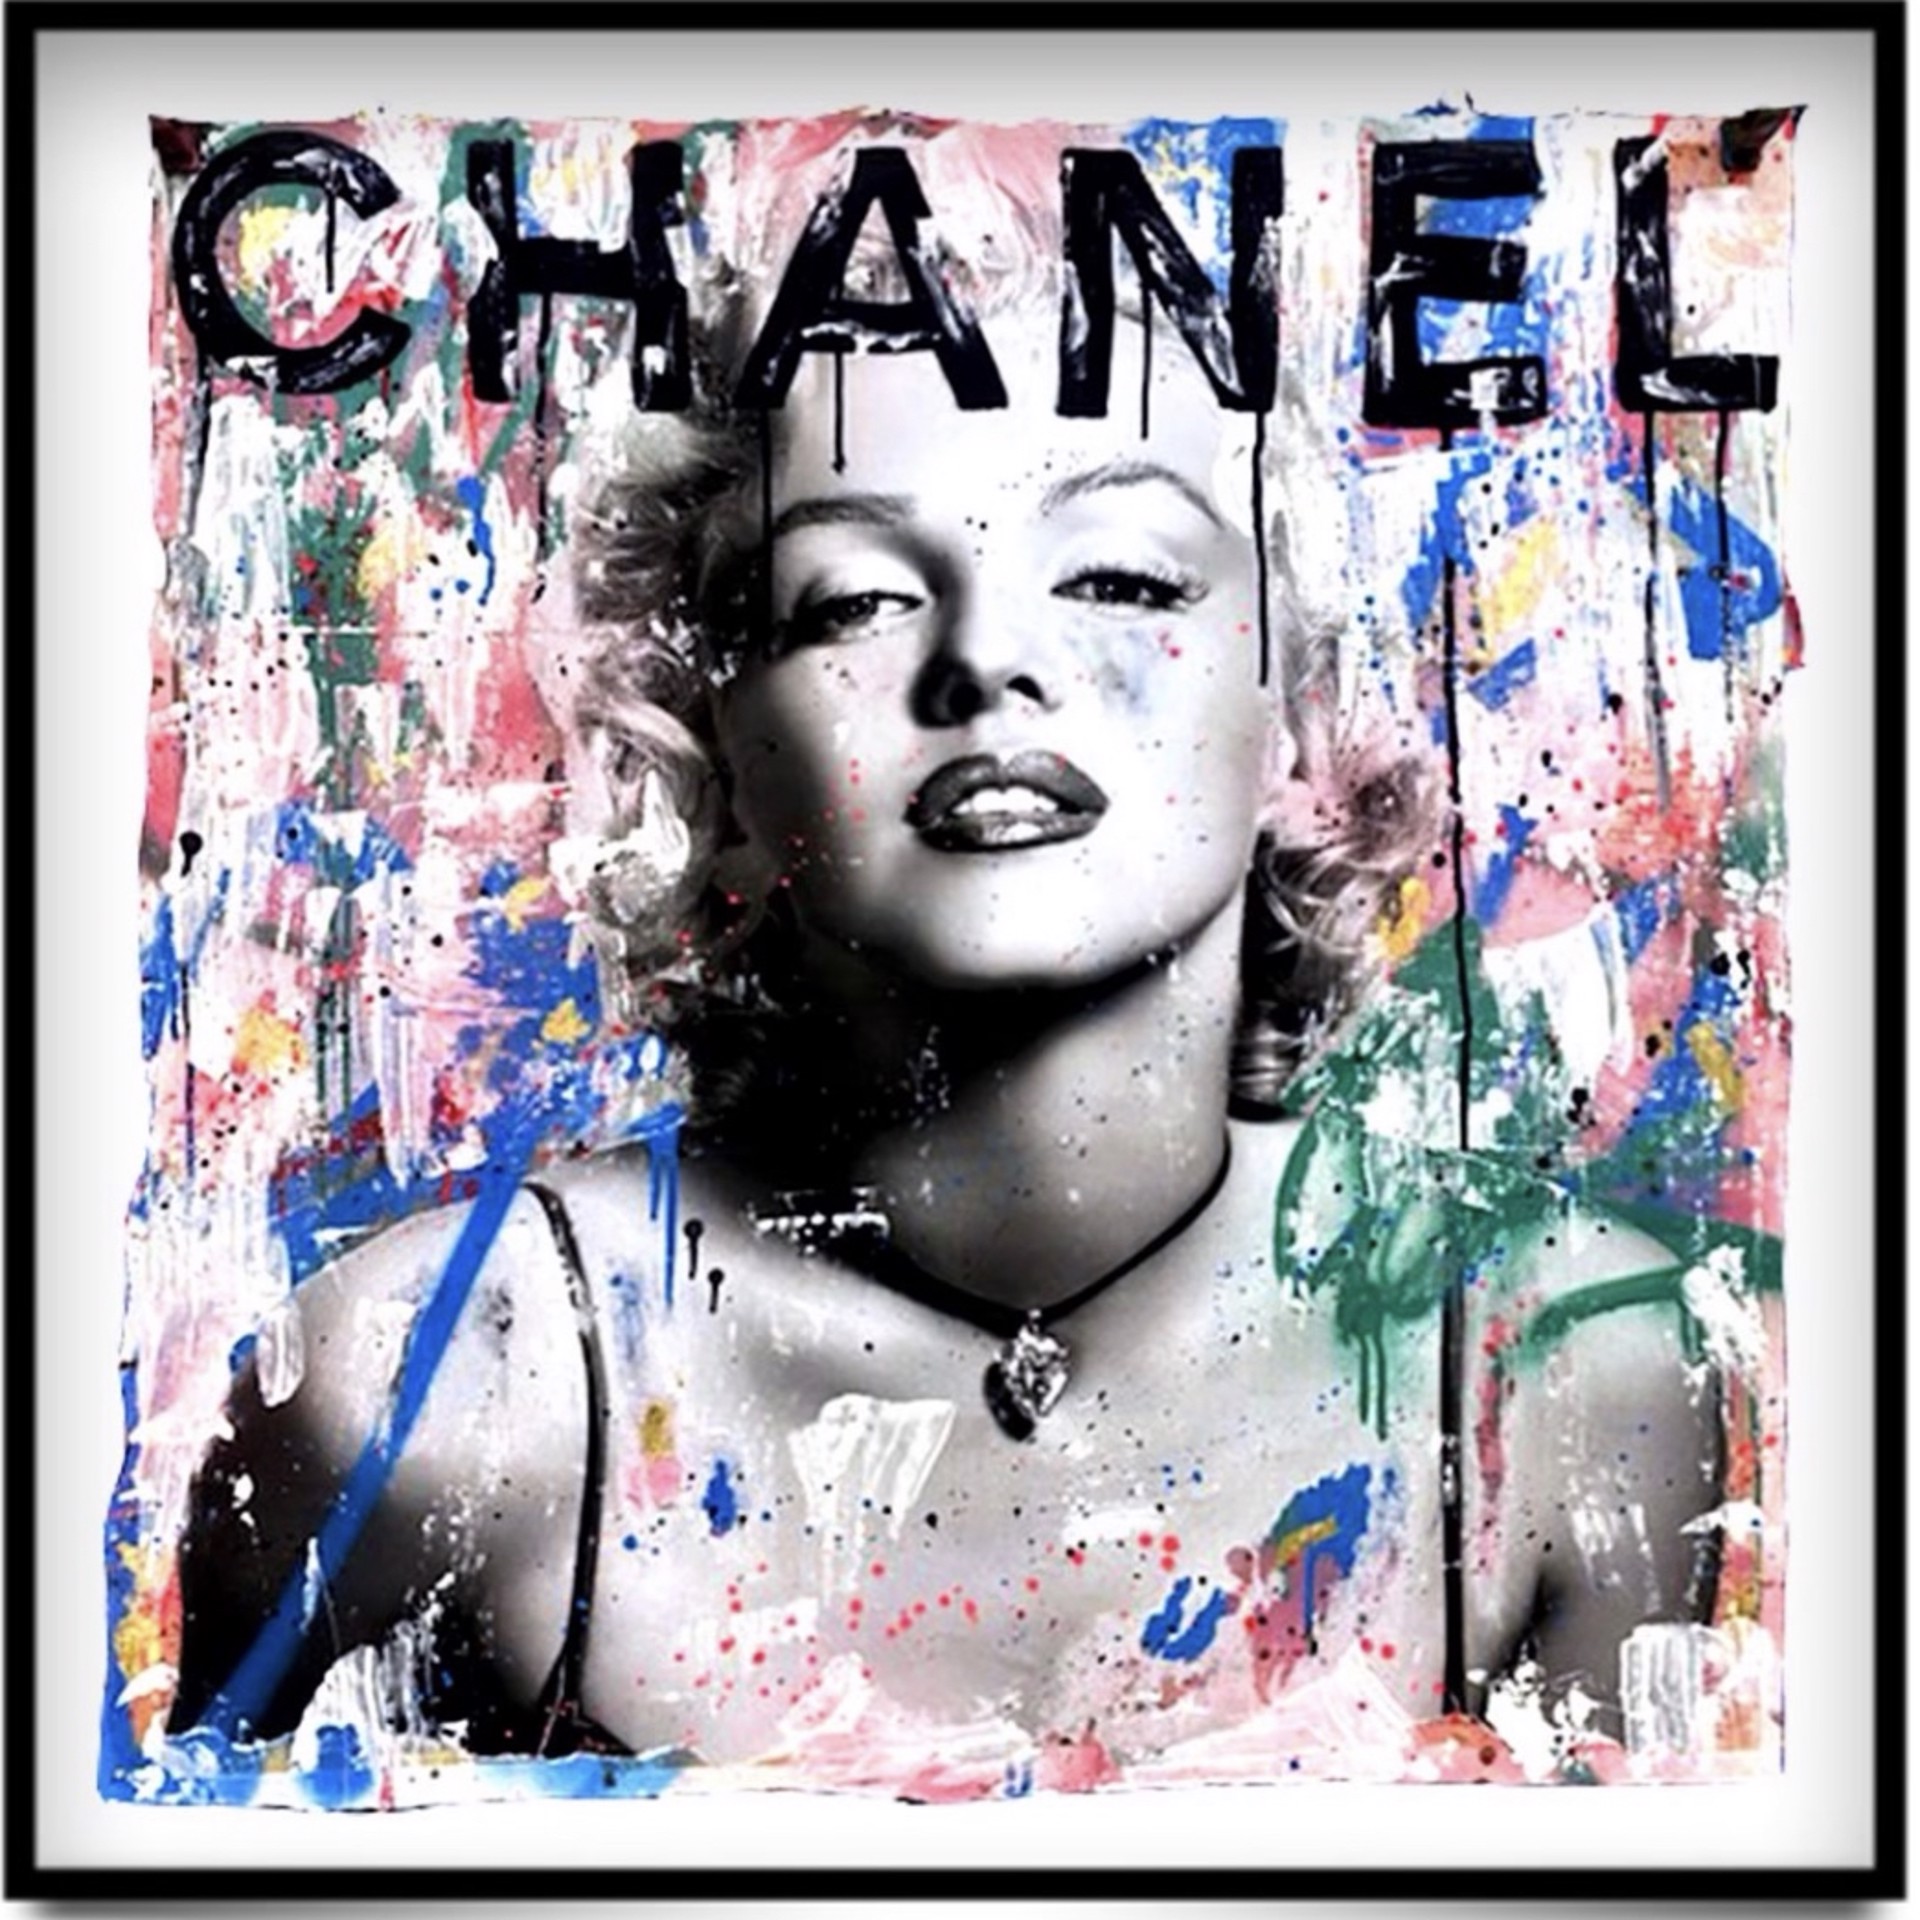 Monroe X Chanel by The White Room Gallery